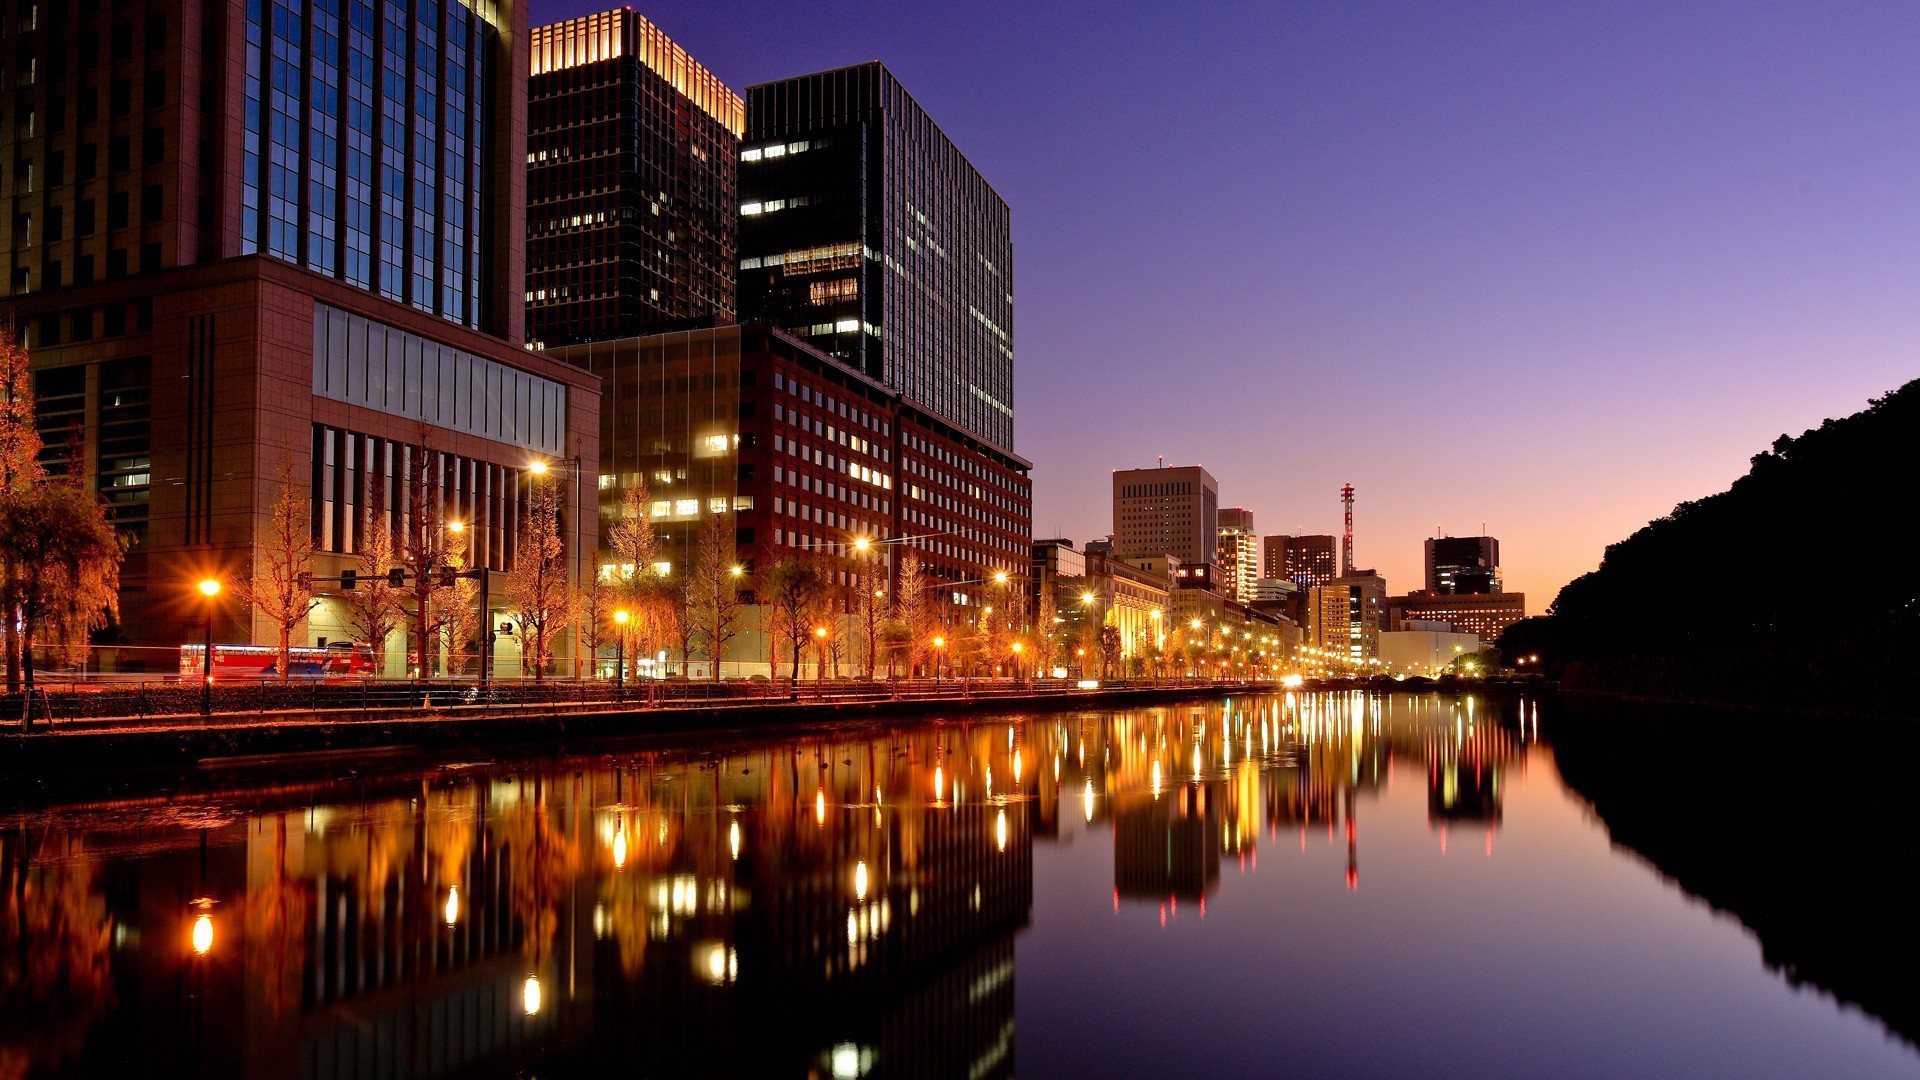 General 1920x1080 city night Tokyo city lights reflection water building Japan Asia